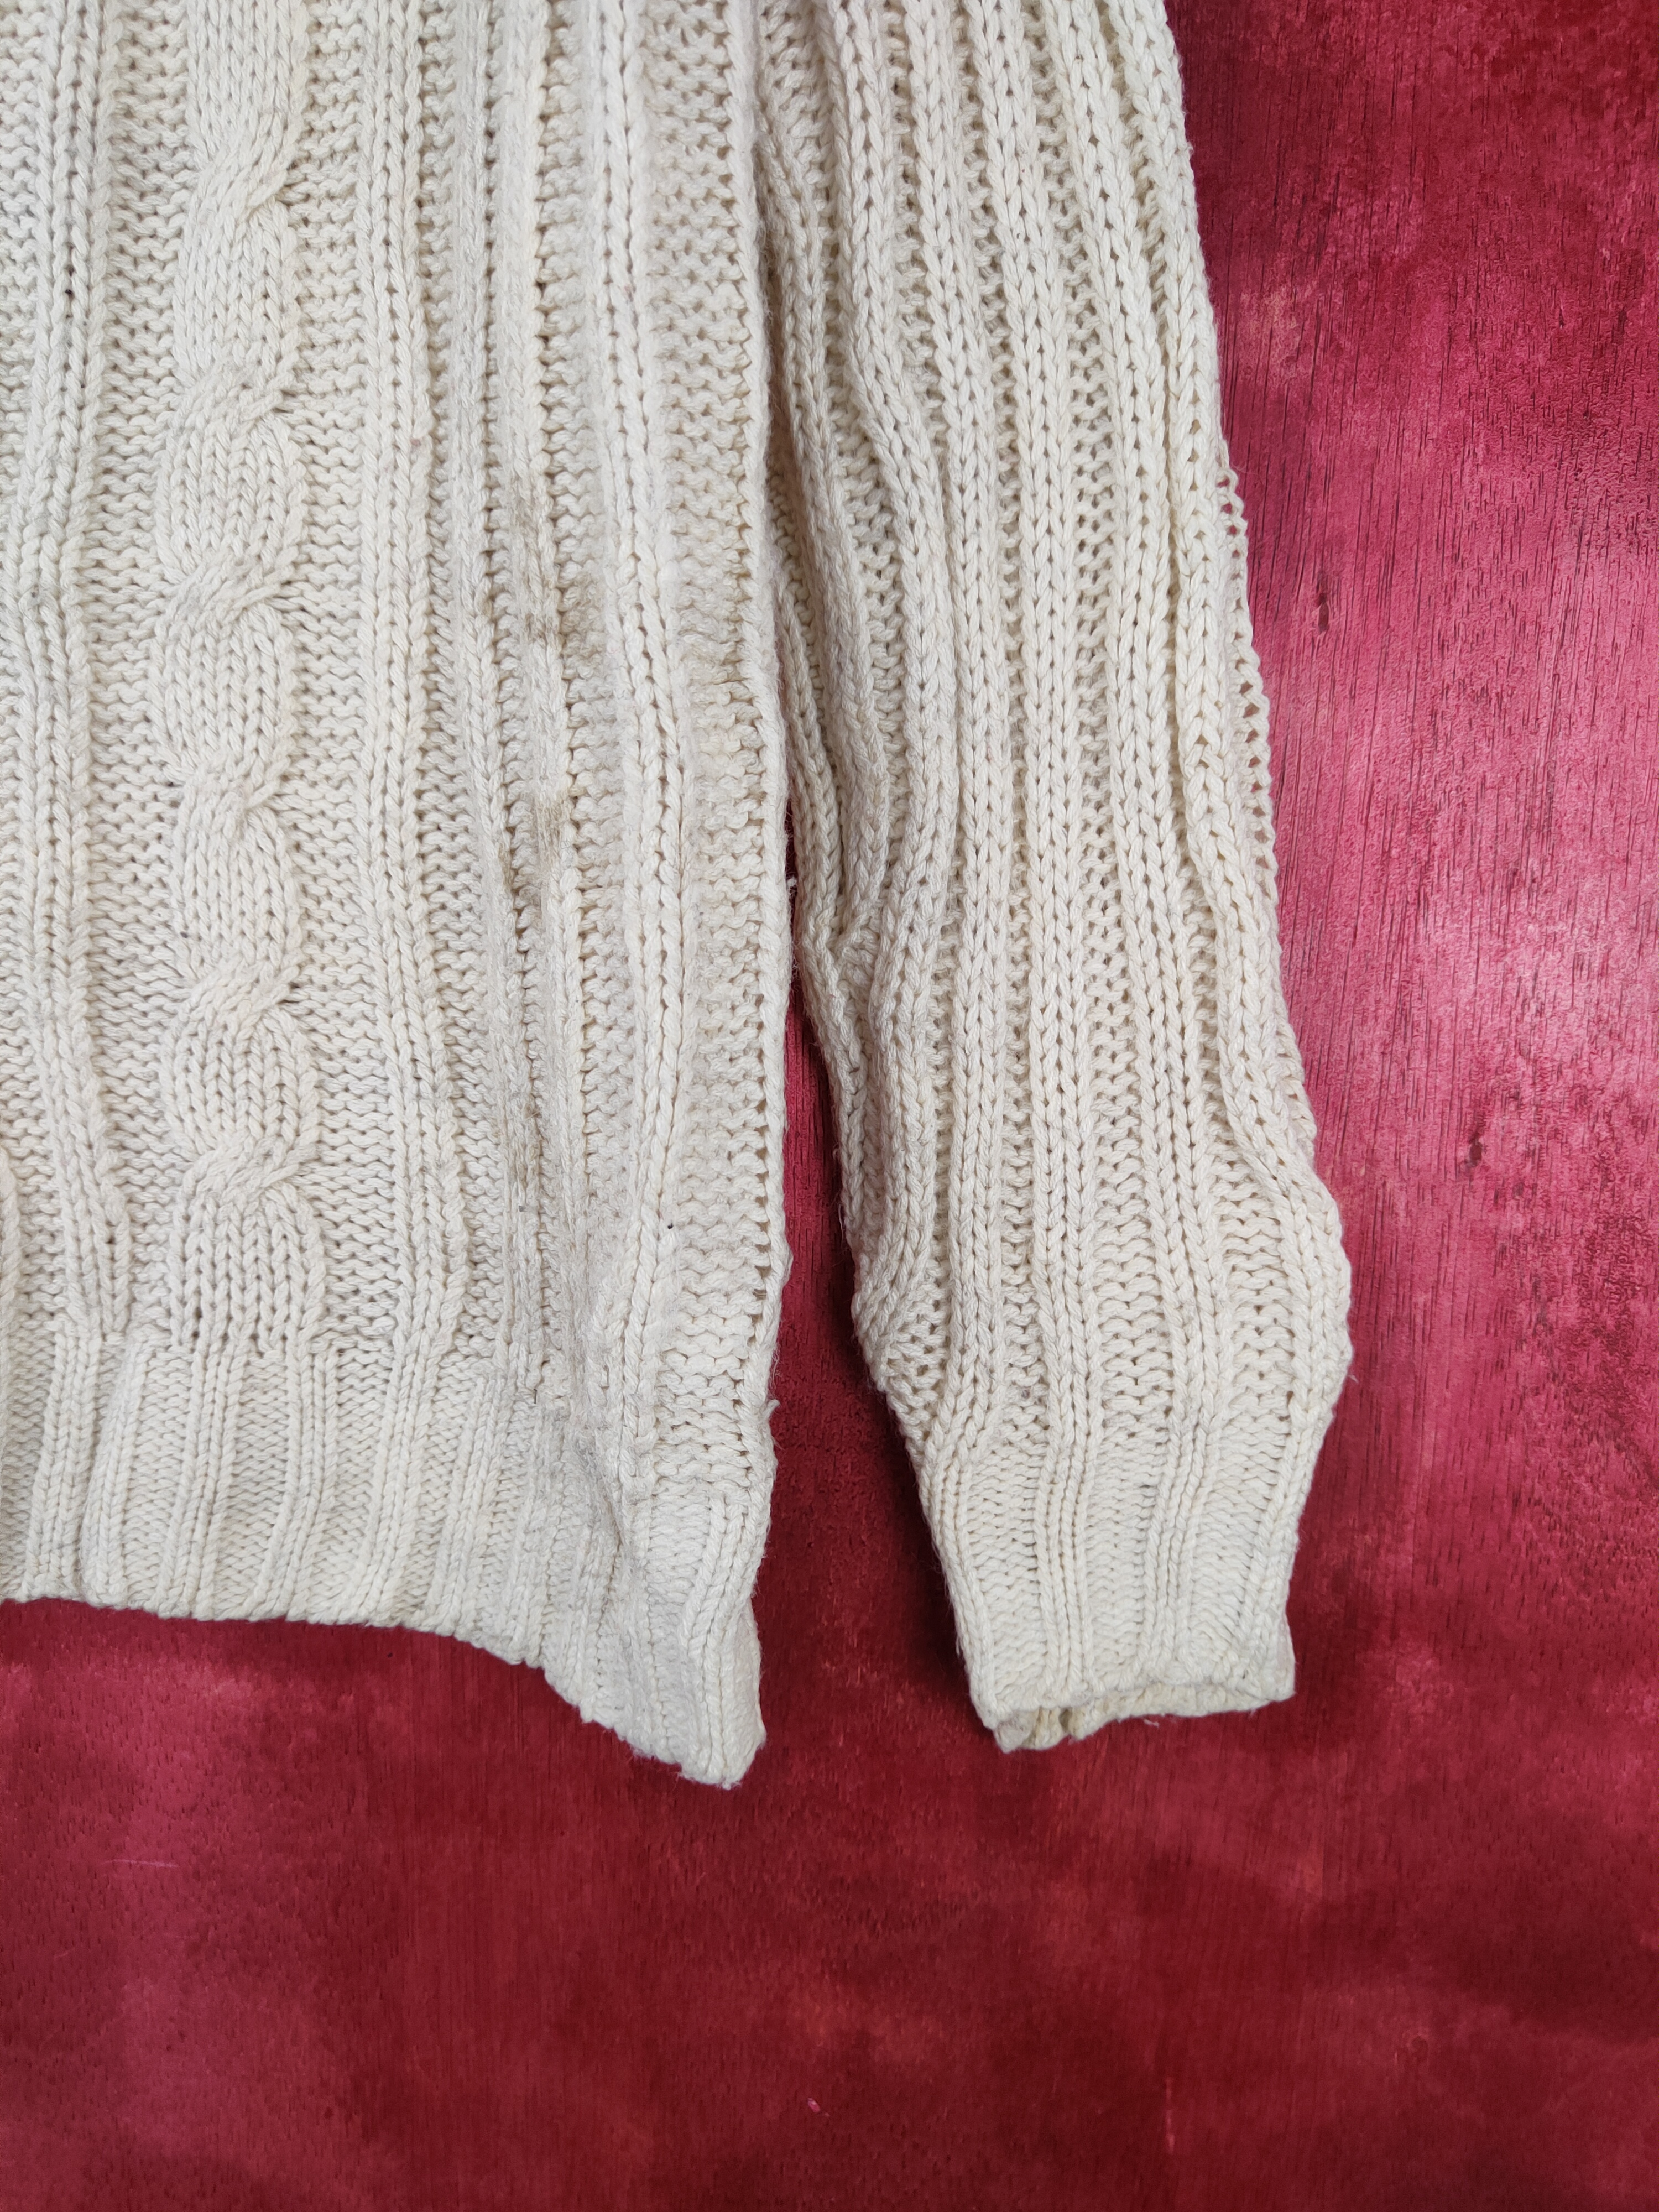 Japanese Brand - Archives White Knitwear Sweater Damage With Stain - 6